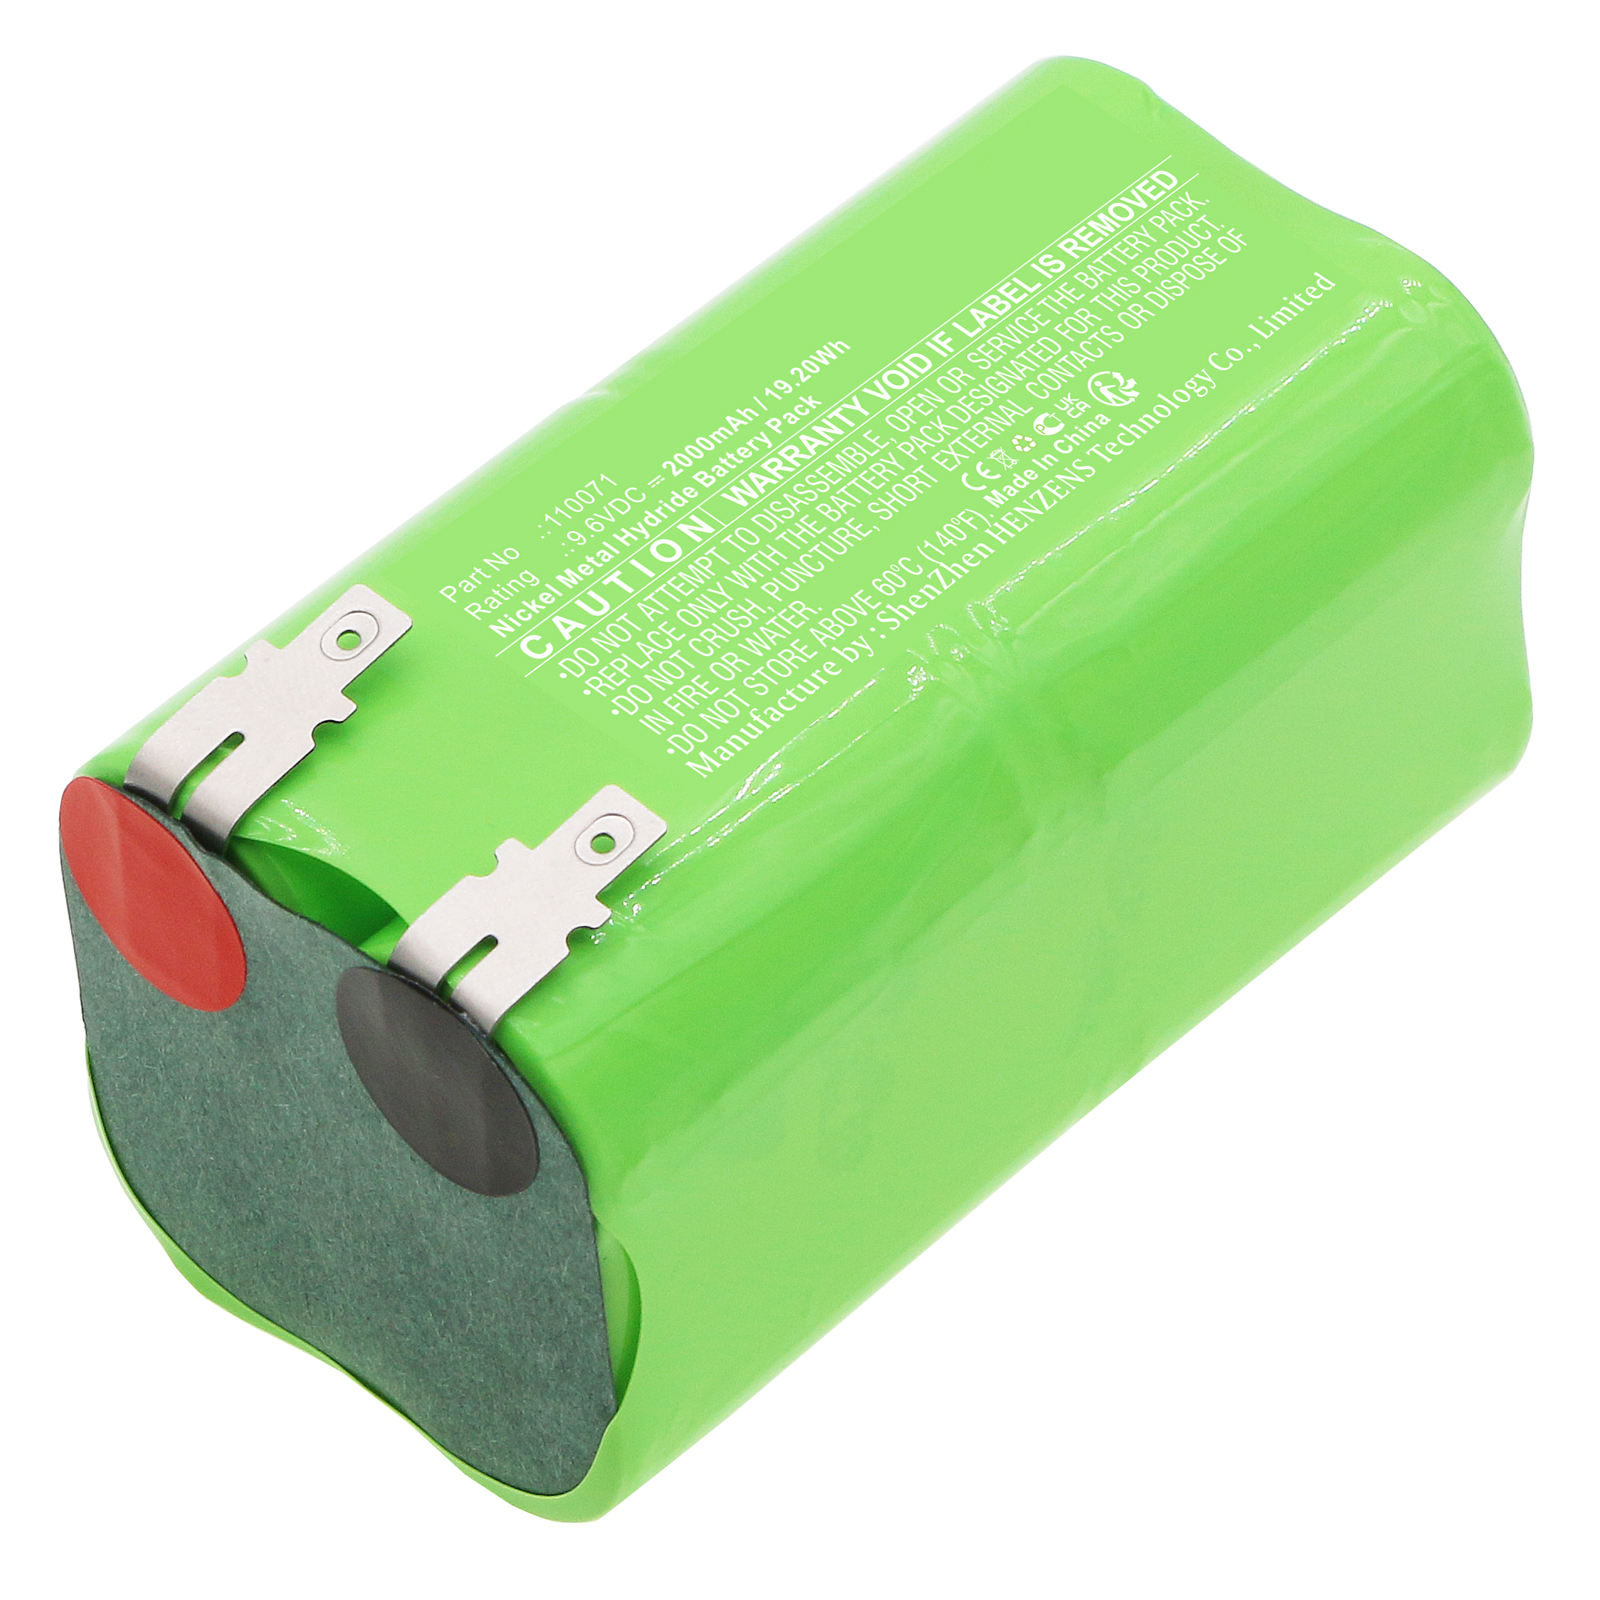 Synergy Digital Medical Battery, Compatible with Schiller 110071 Medical Battery (Ni-MH, 9.6V, 2000mAh)